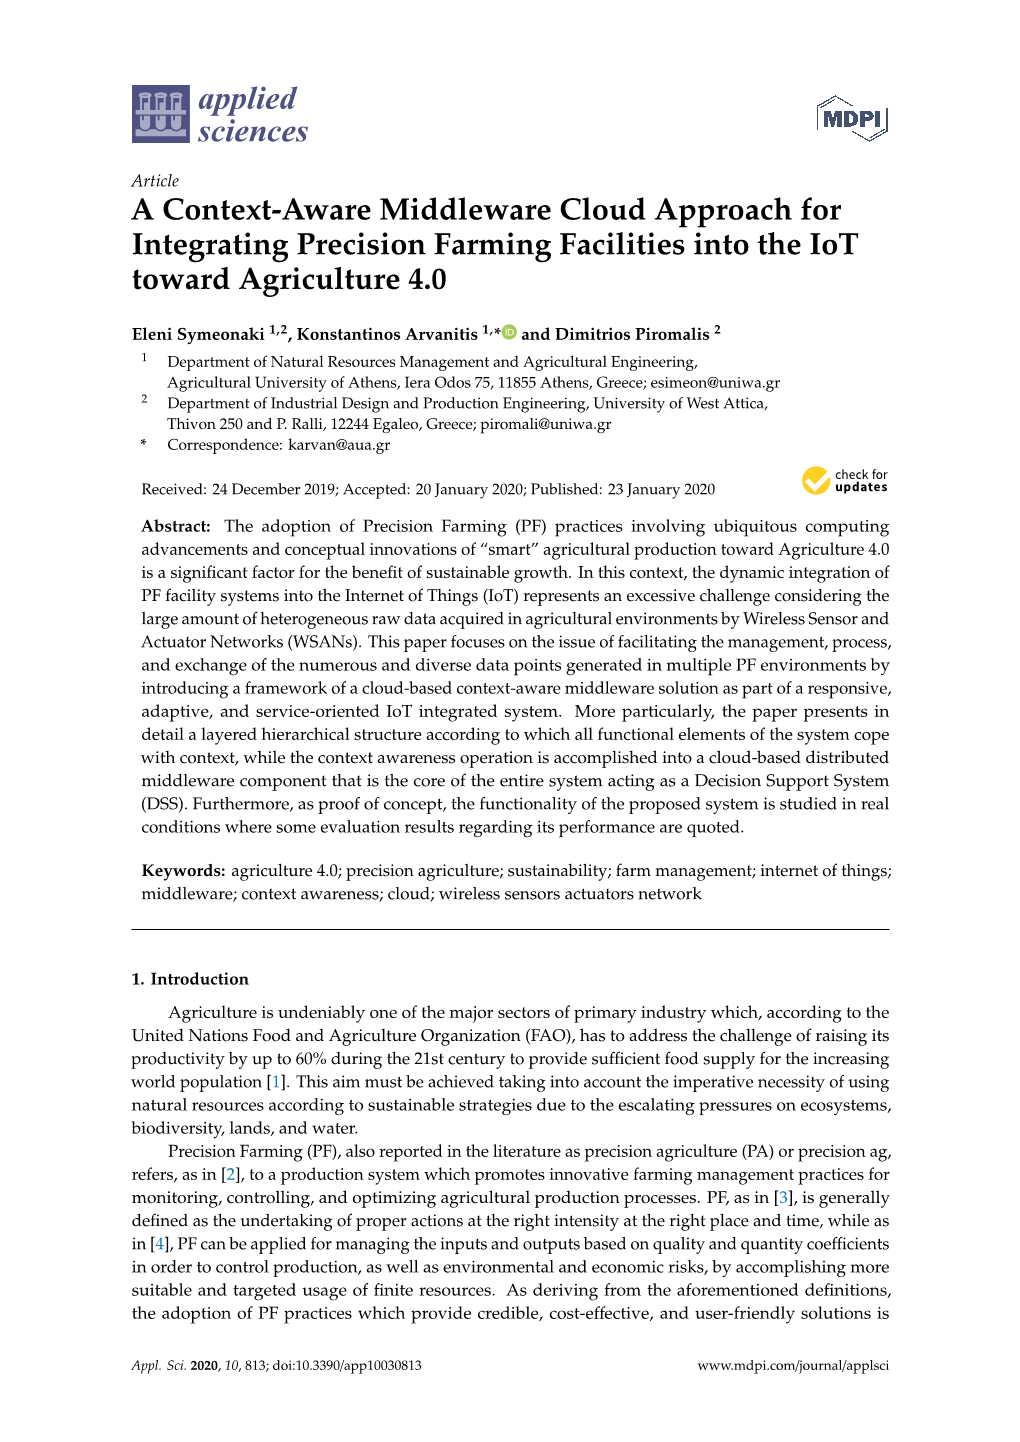 A Context-Aware Middleware Cloud Approach for Integrating Precision Farming Facilities Into the Iot Toward Agriculture 4.0